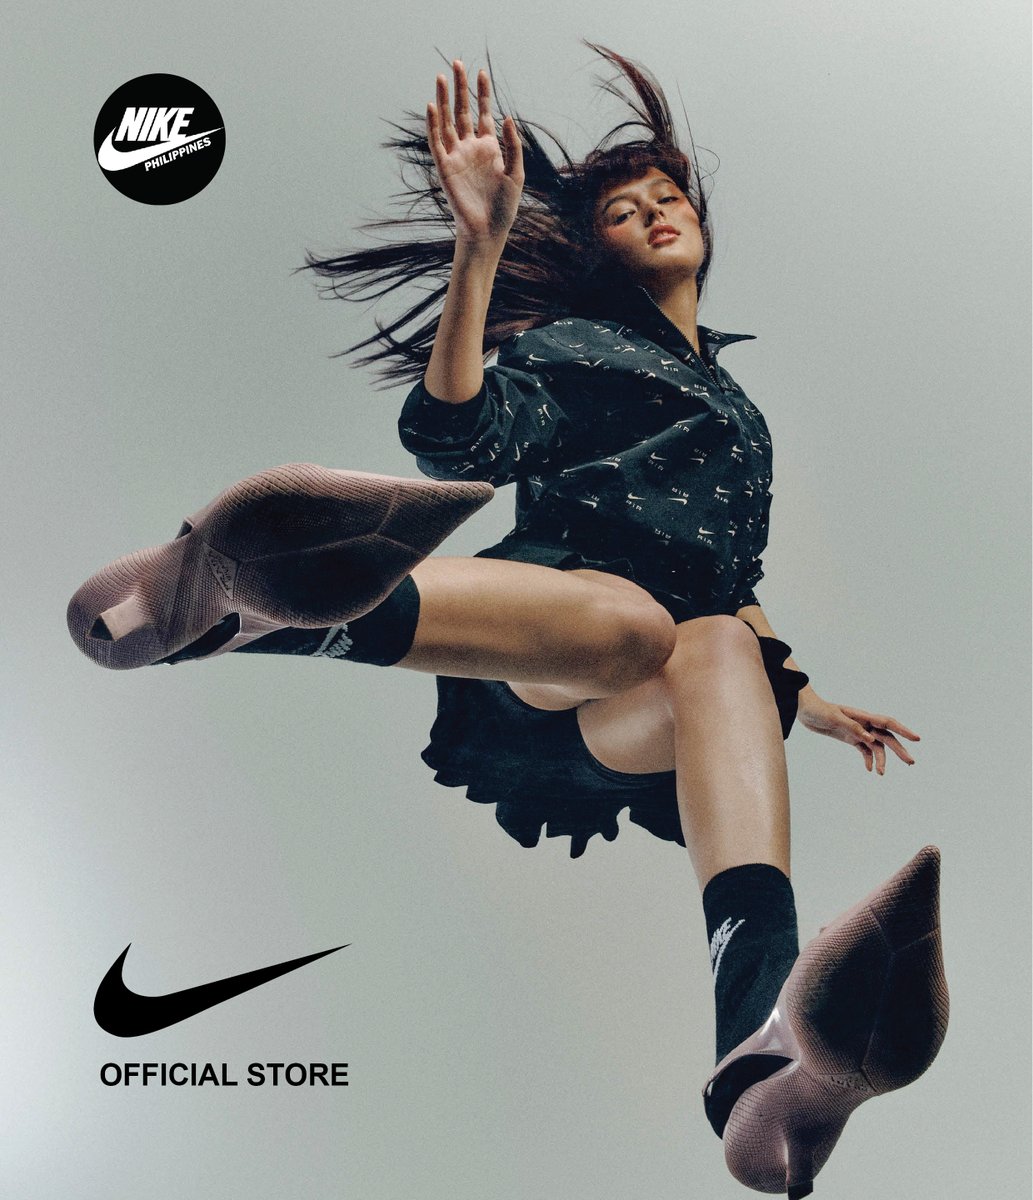 FIND YOUR AIR MAX 
SHOP HERE: invol.co/clkxqwl 

Elevate your fit with Air Max styles made for going big and going bold. 

#Nike #NikePH #NikePH5 #NikeSportsPH #NikePHStore #NikeAir #NikeAirMax #Air #AirMax #Liza #Lisa #Soberano #Hope #LizaSoberano #Shoes